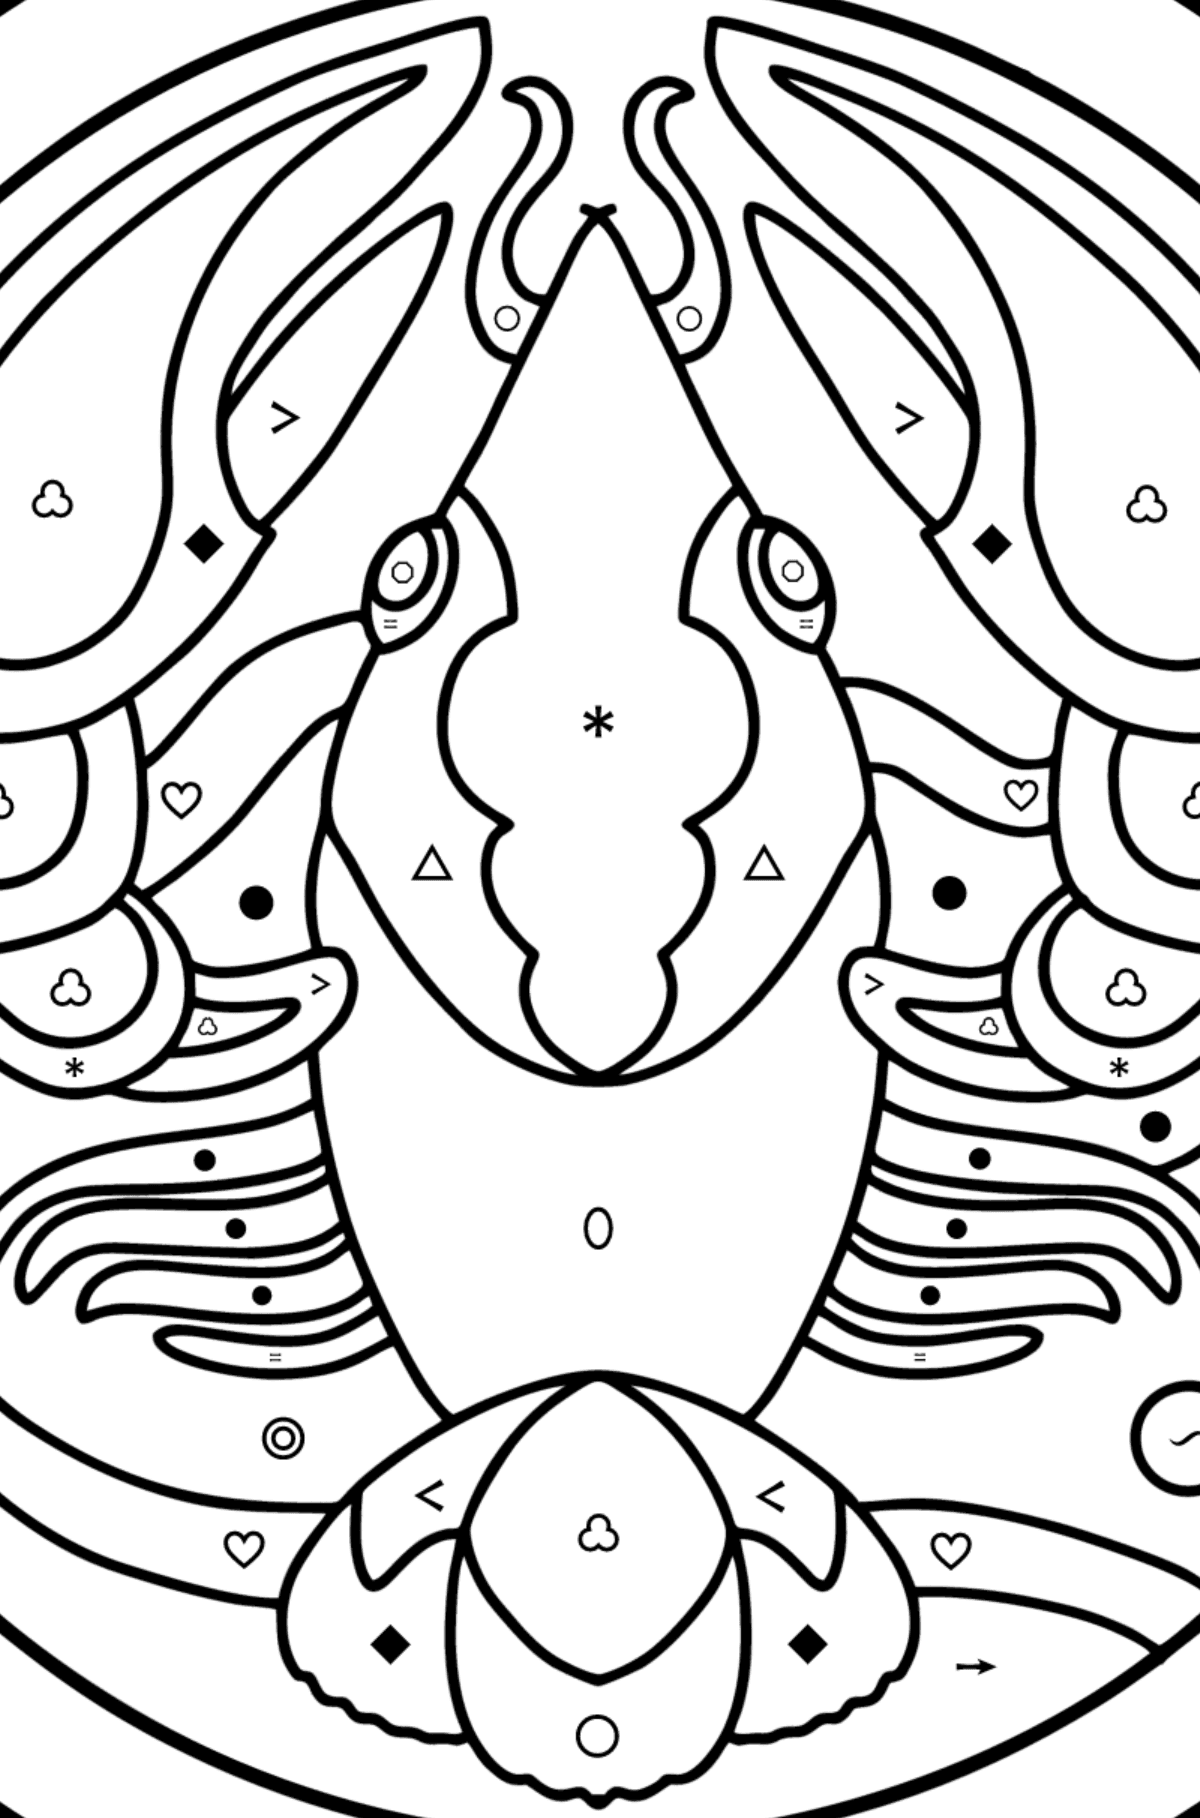 Coloring page for kids - Cancer zodiac sign - Coloring by Symbols and Geometric Shapes for Kids